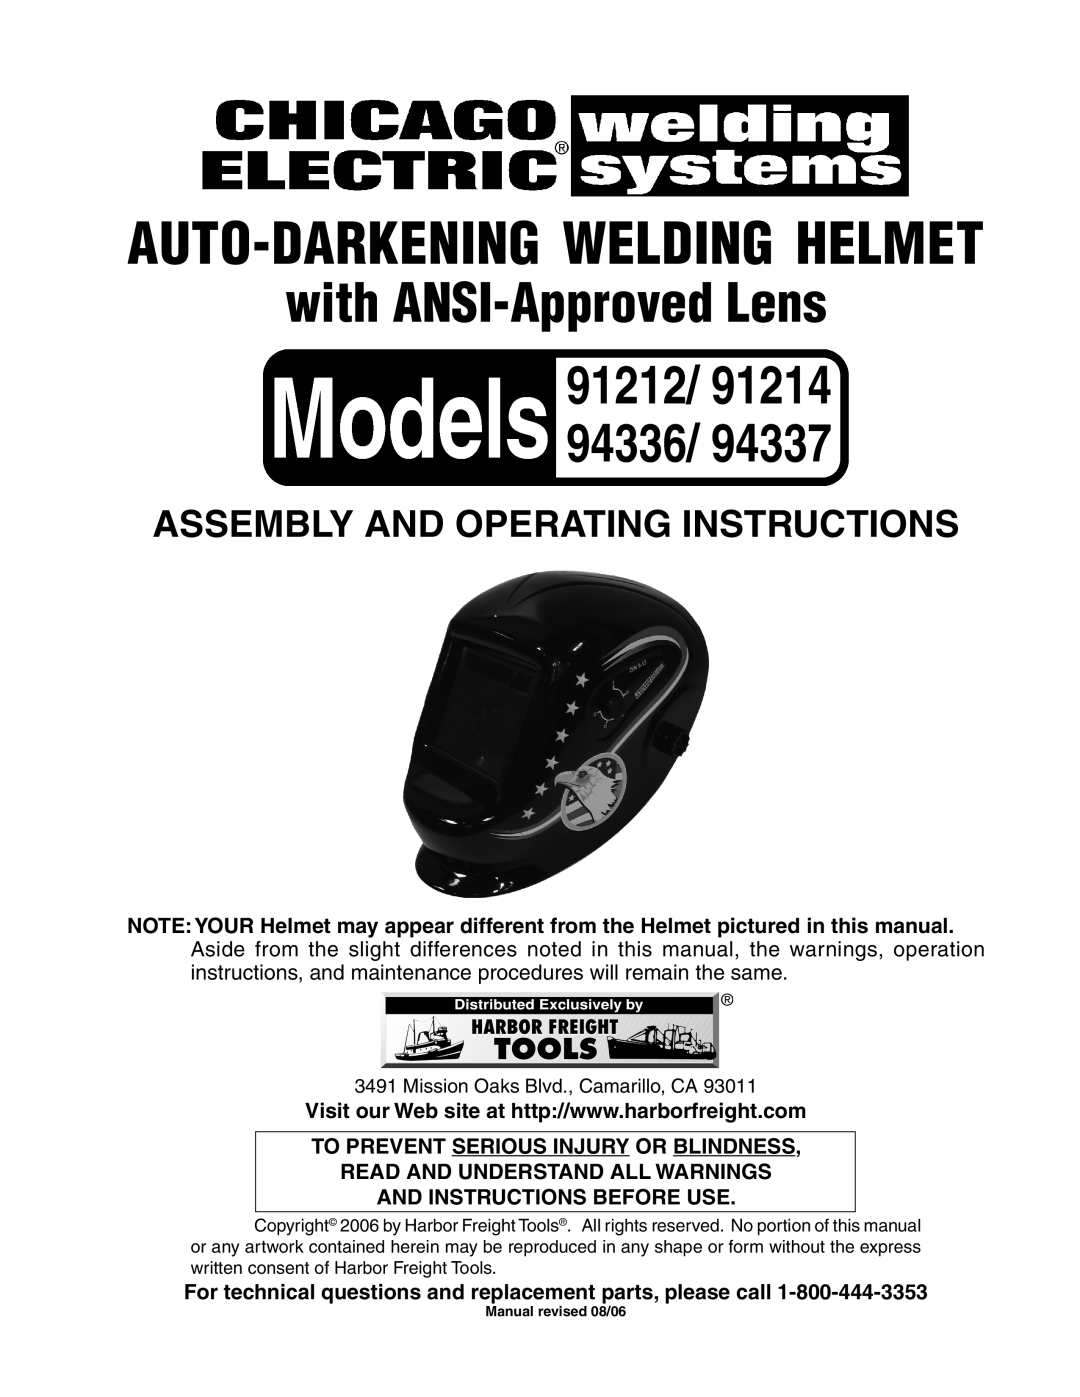 Harbor Freight Tools 94336, 94337 operating instructions To prevent serious injury or blindness, with ANSI-Approved Lens 